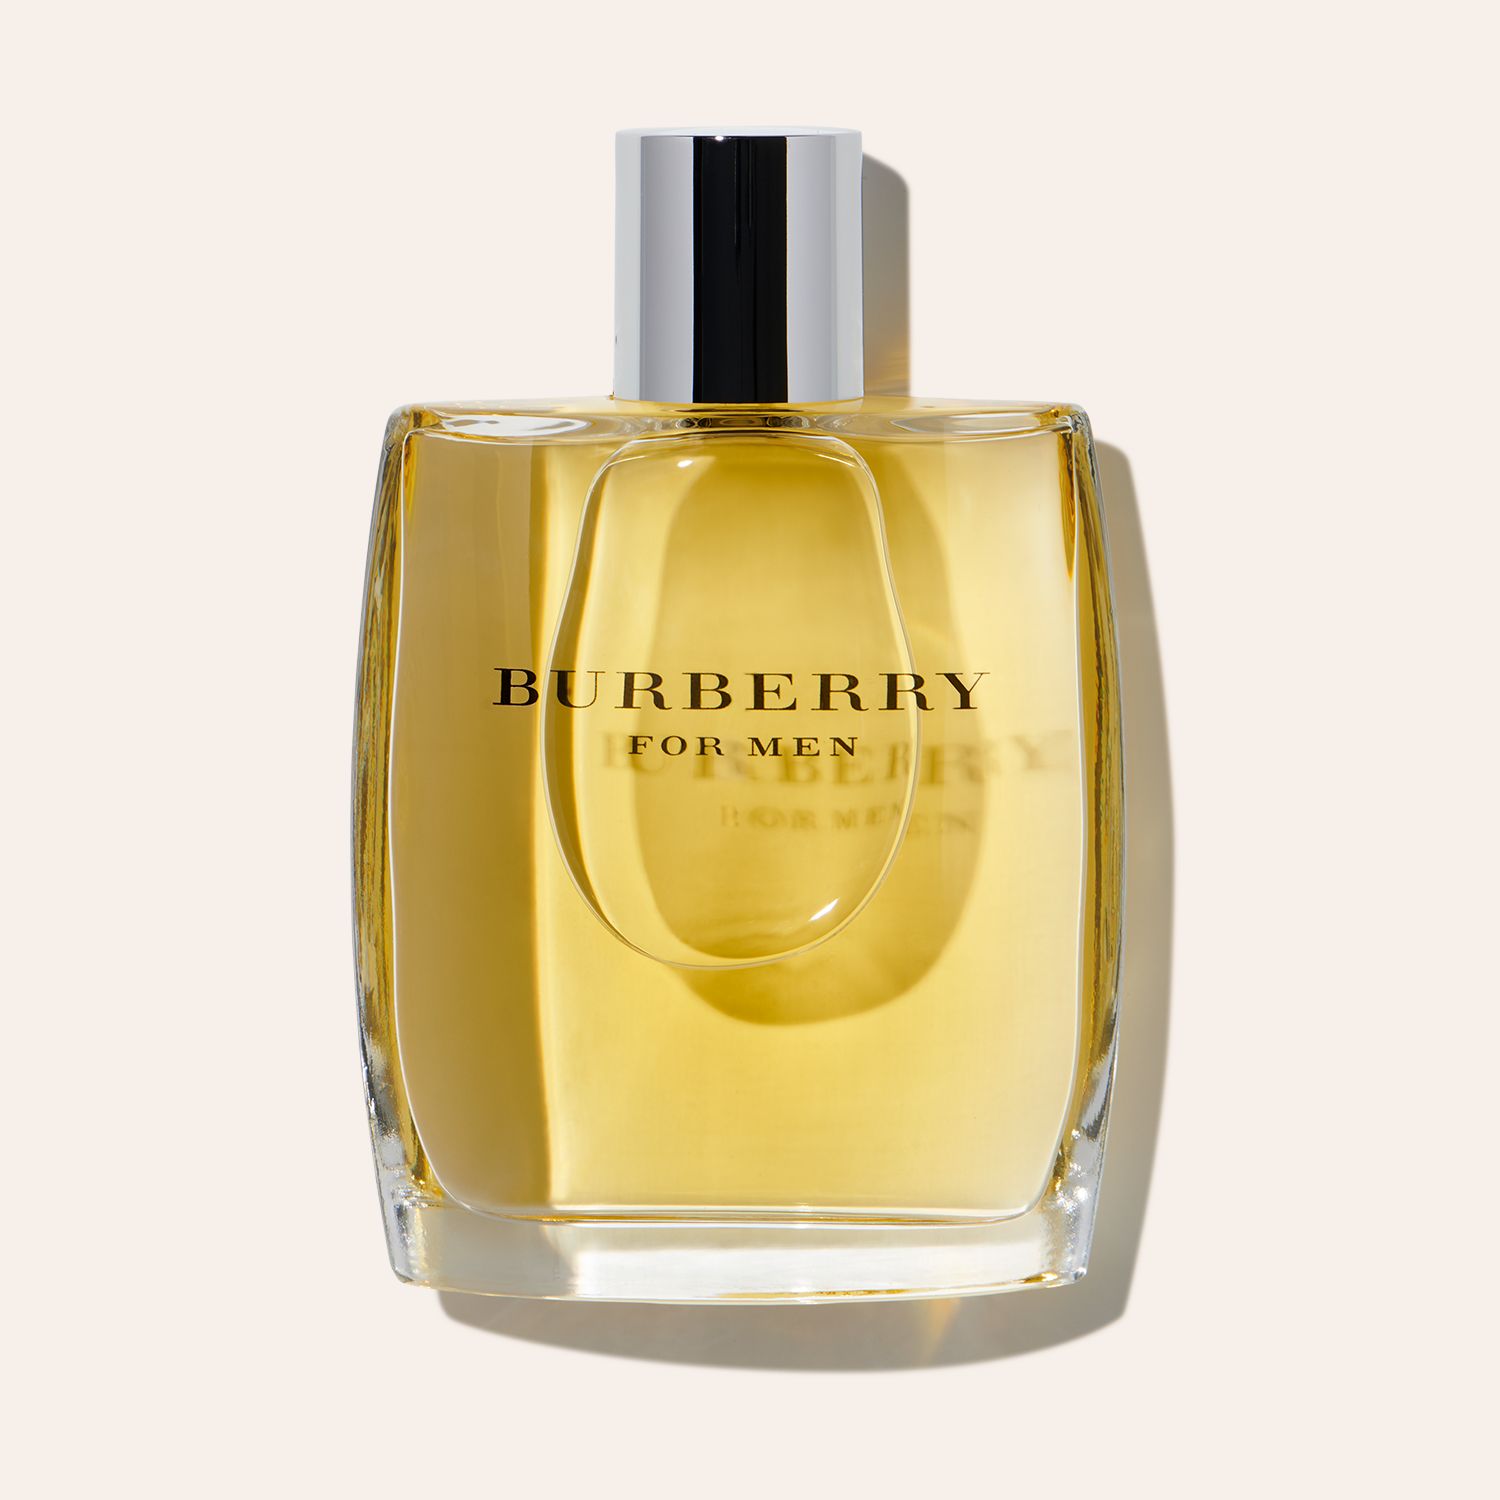 Buy BURBERRY Burberry Touch for Men at Scentbird for